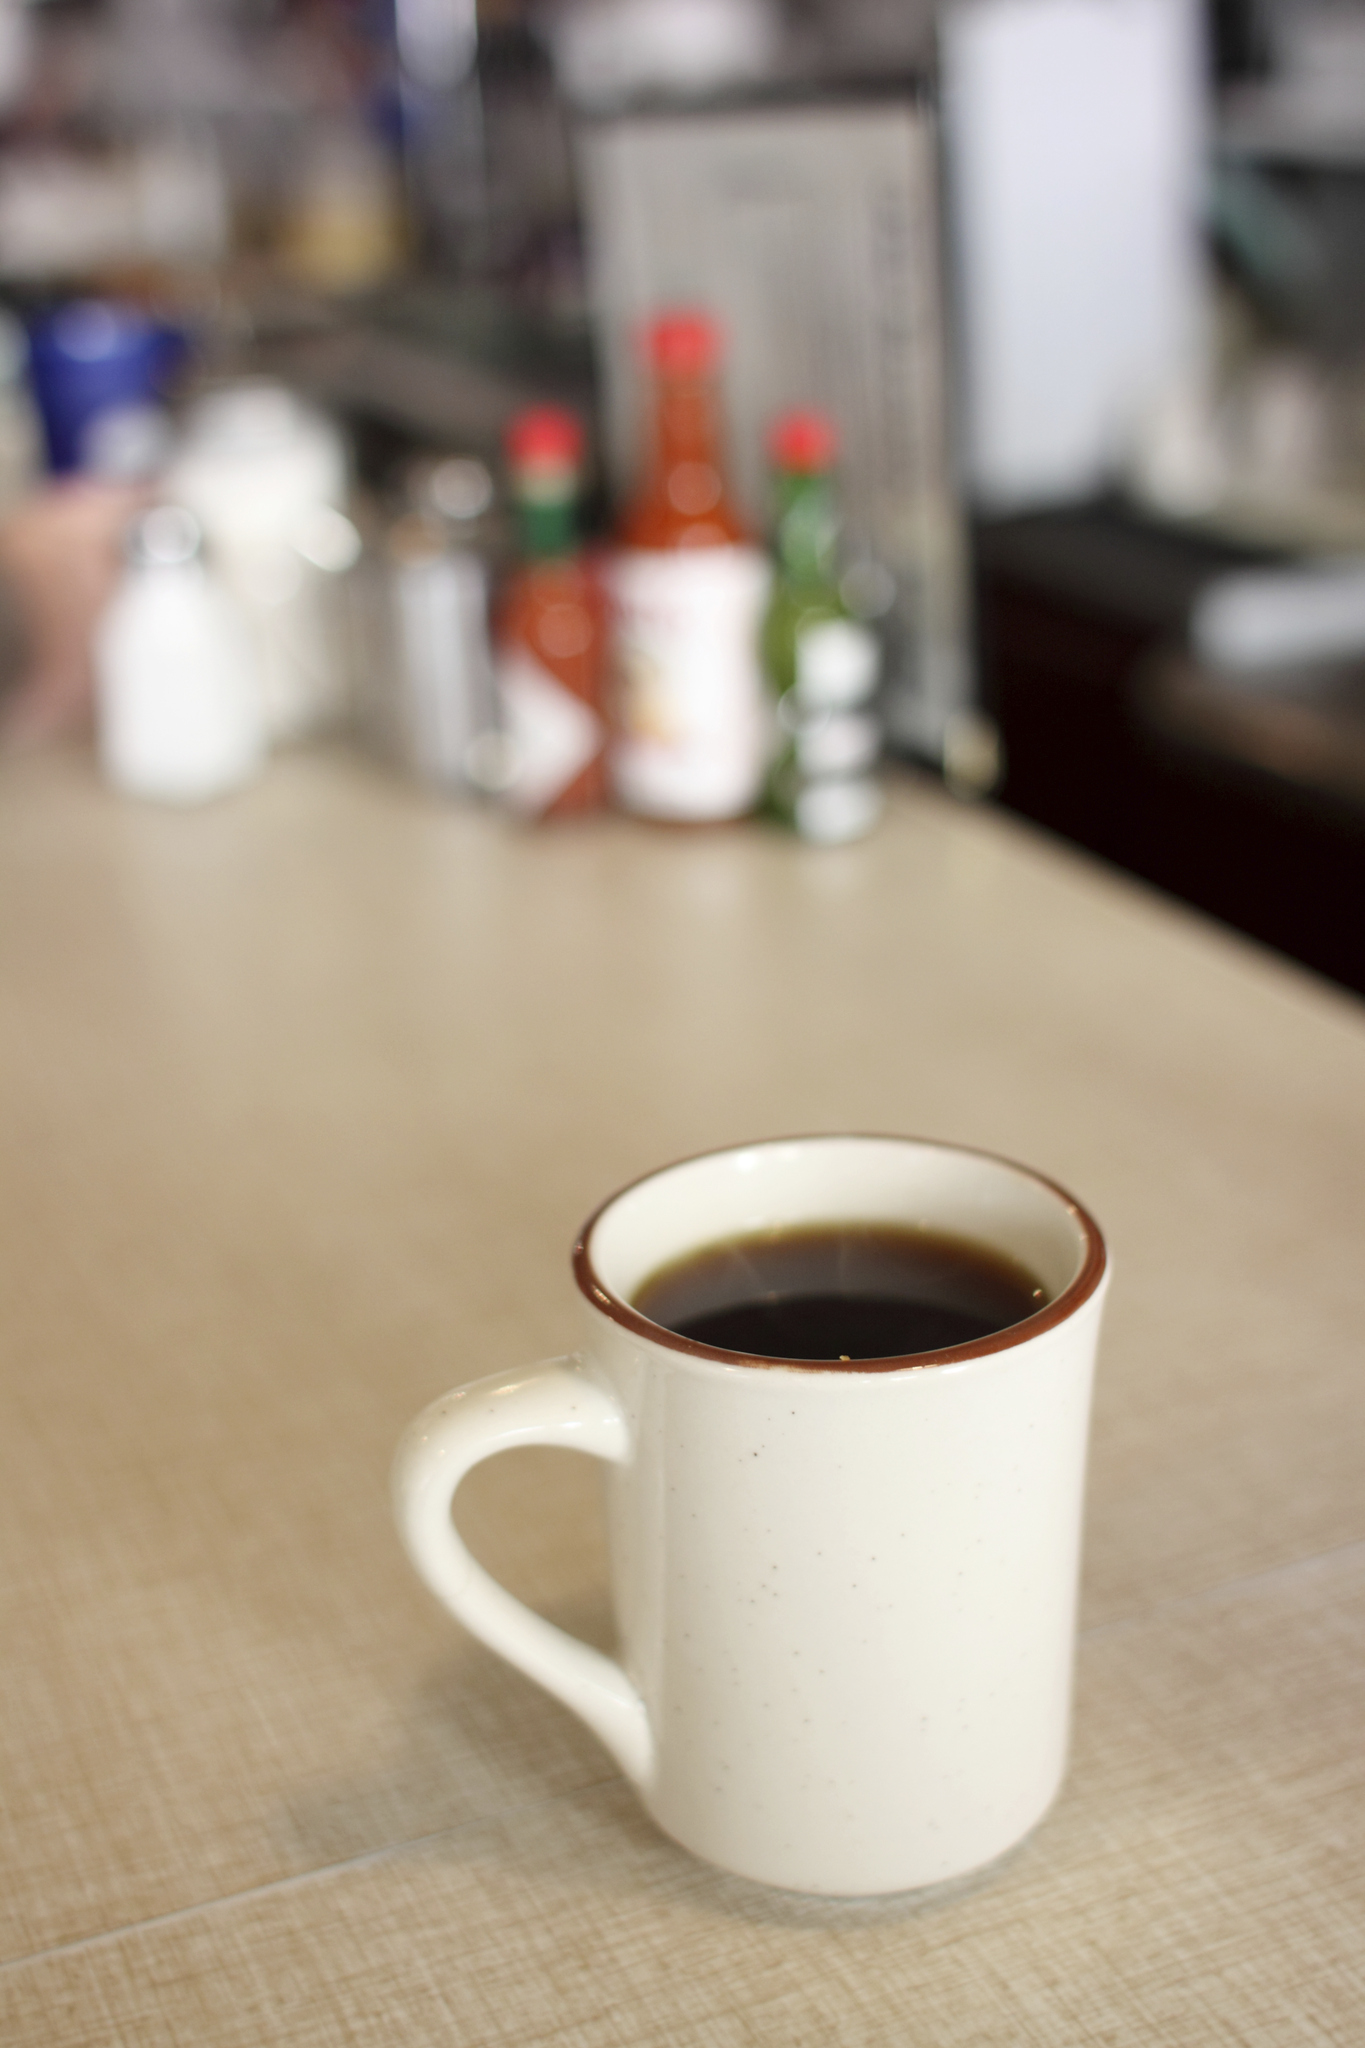 A table hosts a white coffee cup filled with the rich aroma of coffee.